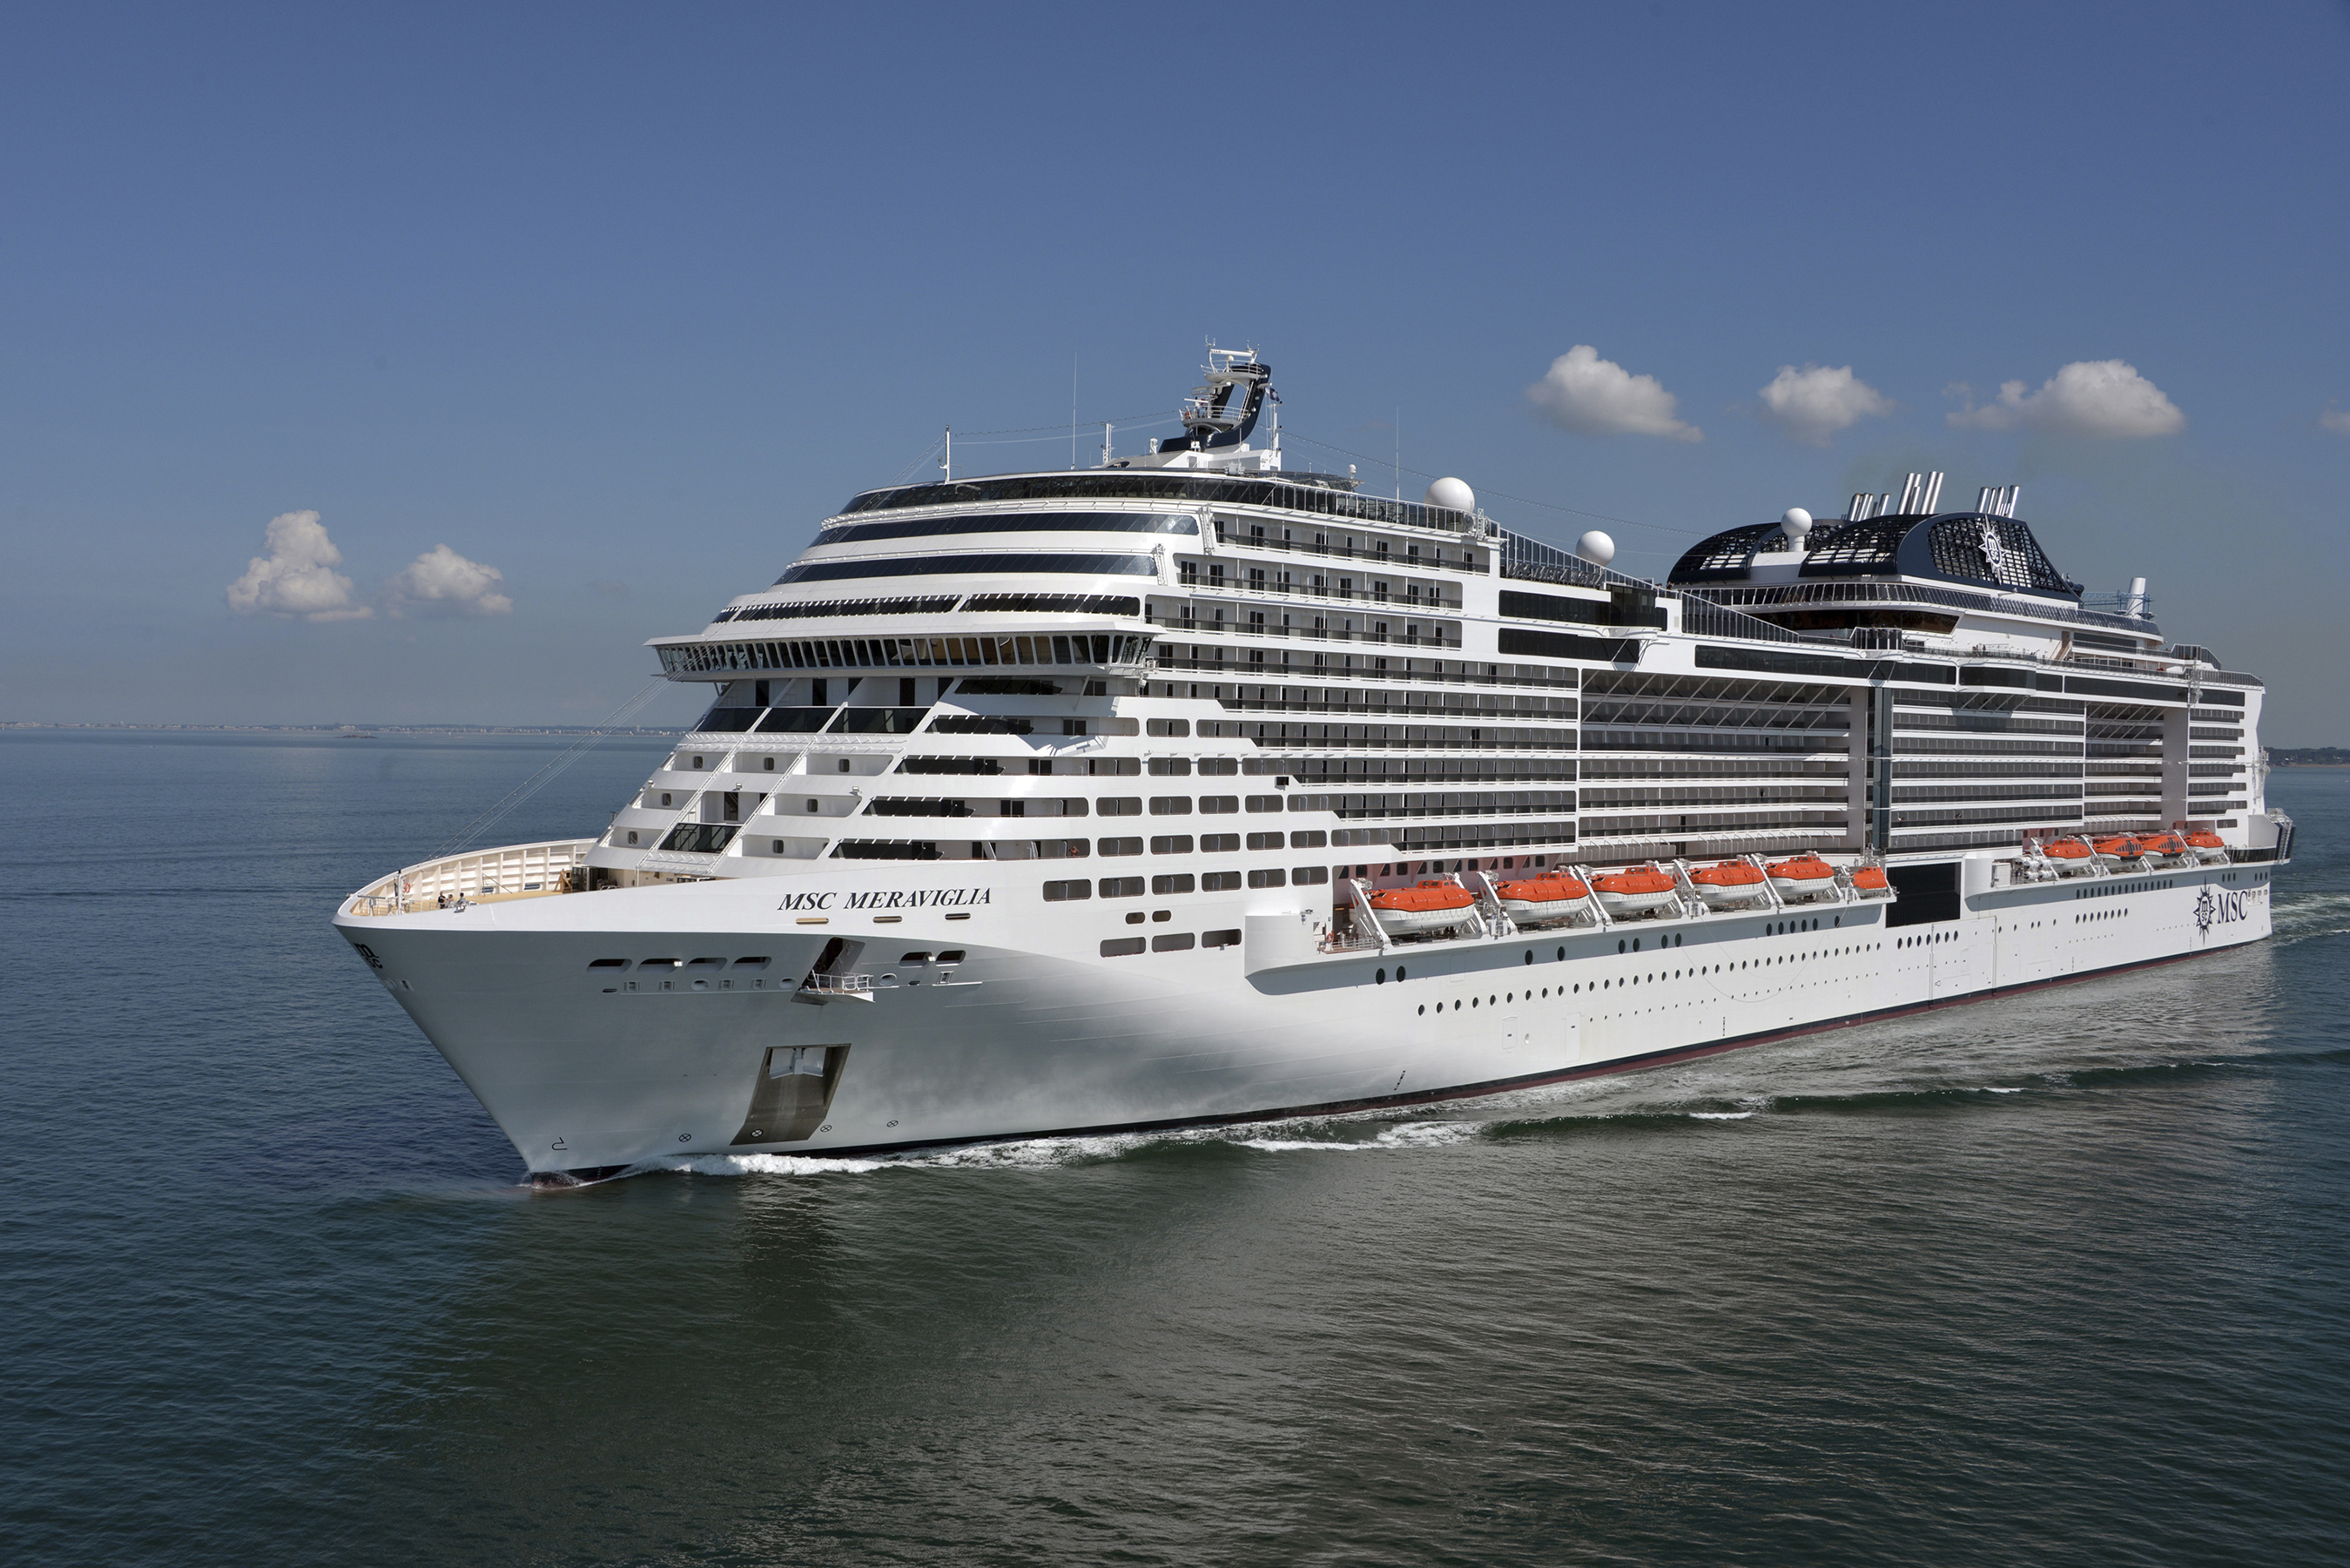 Upon arrival to New York, MSC Meraviglia will sail two round-trip cruises from New York to Canada & New England, and then journey through the Caribbean to homeport in Miami.